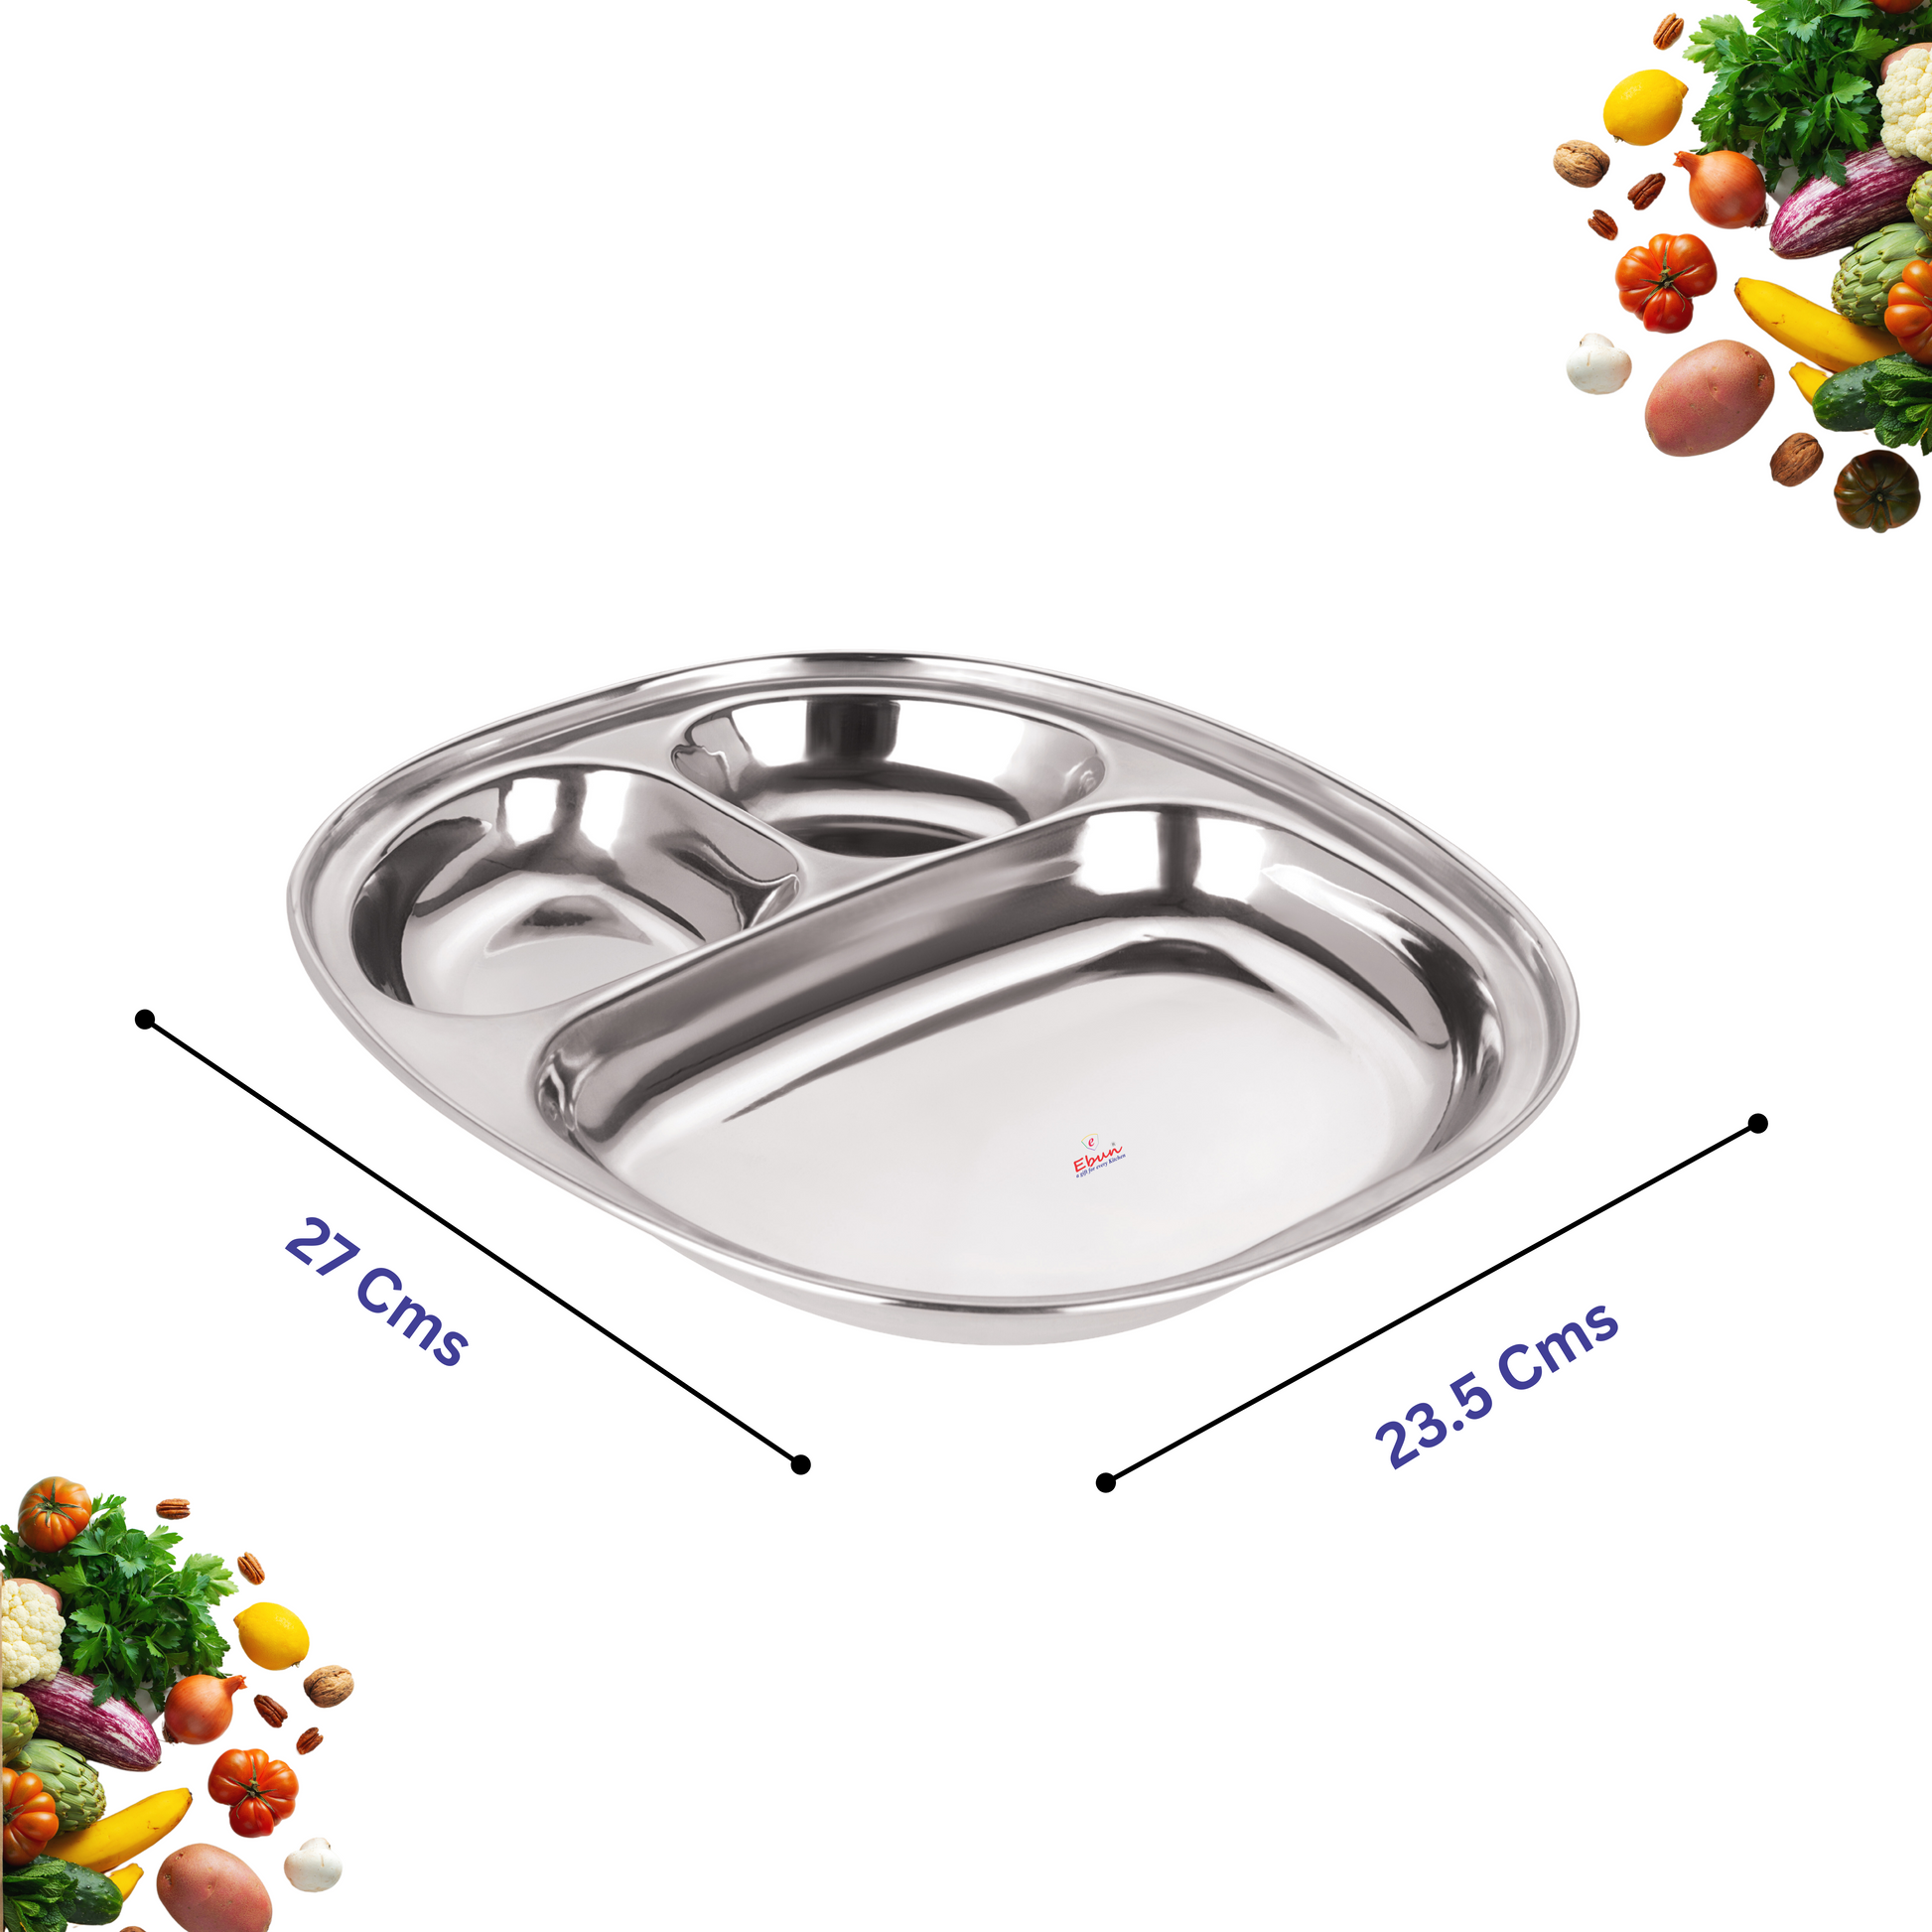 Stainless Steel Pav Bhaji Plate with Compartments